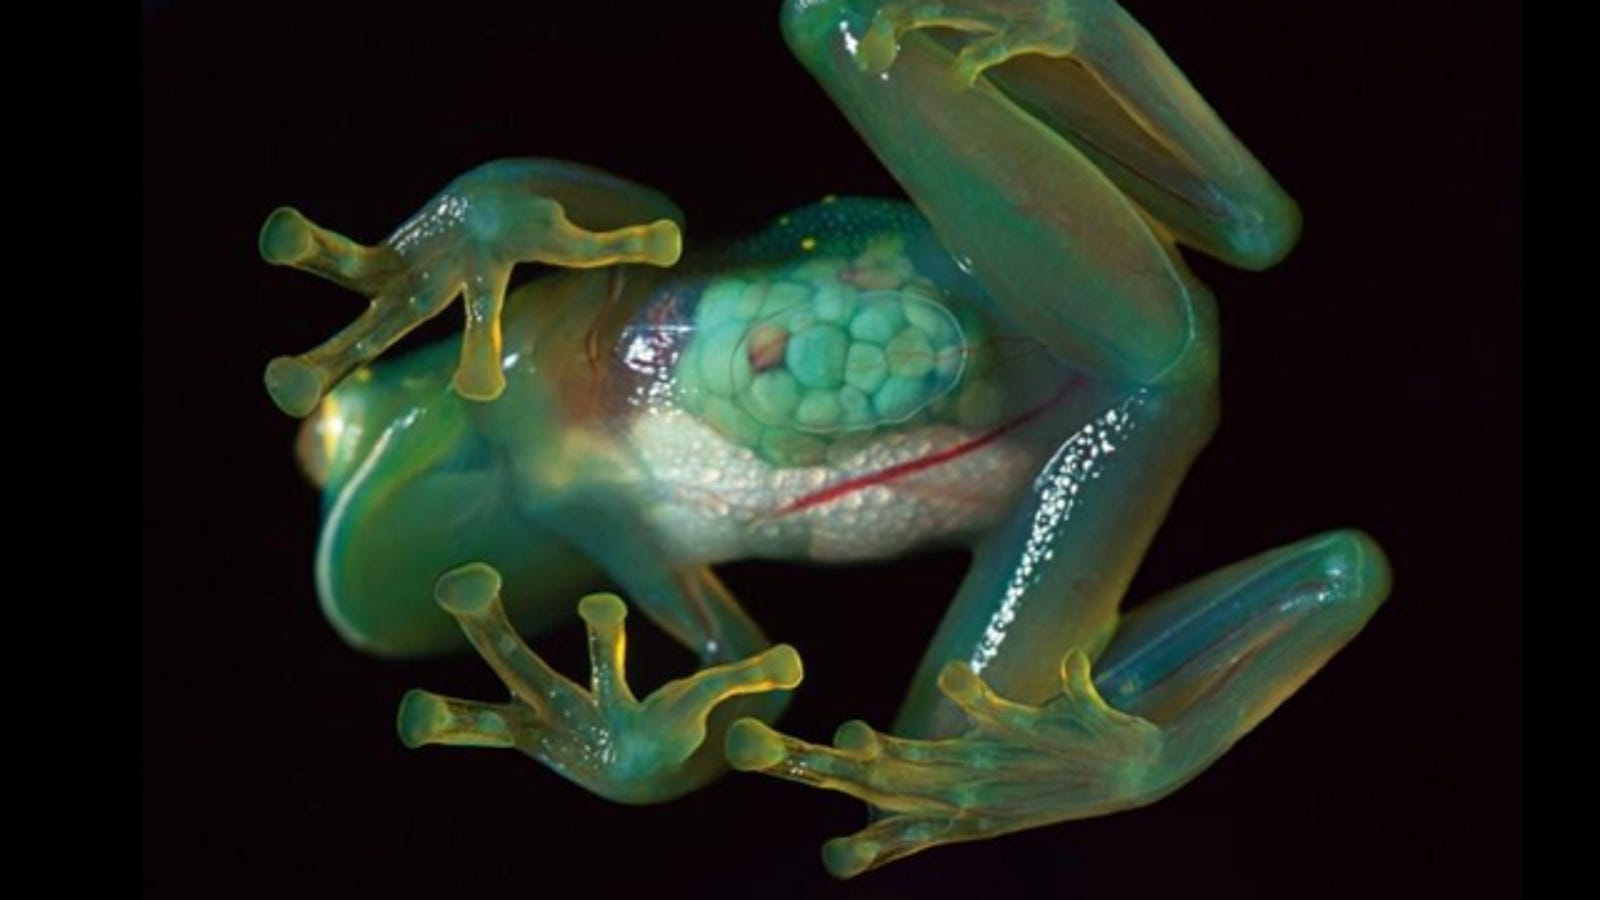 This otherworldly amphibian has a completely transparent underbelly